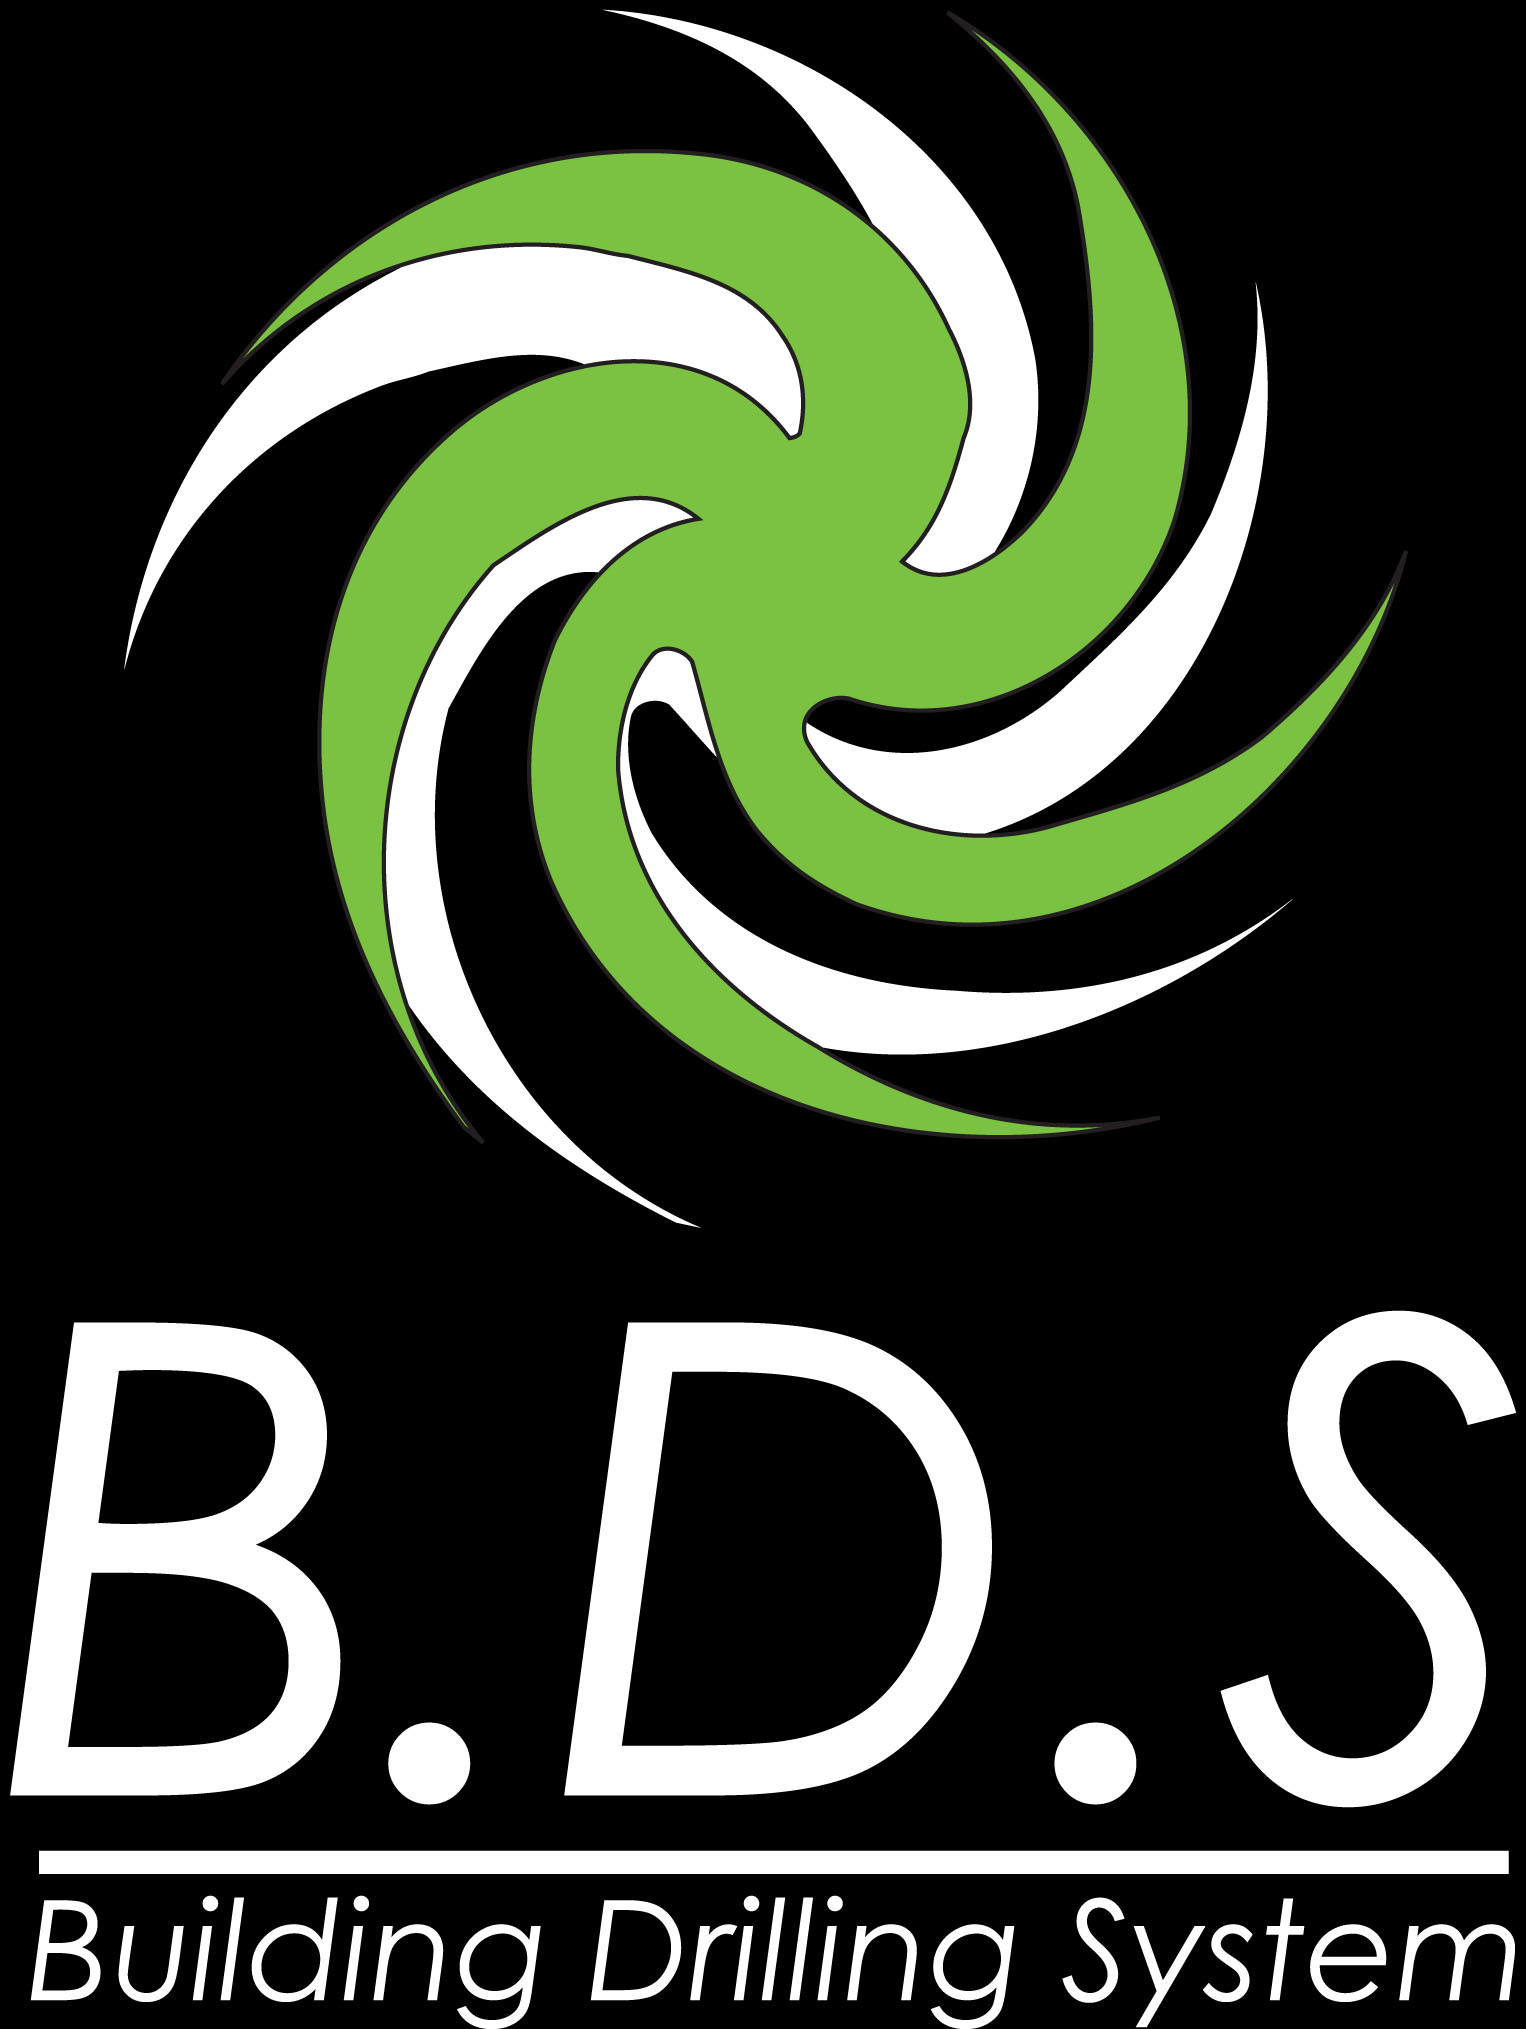 Bds – Building drilling system